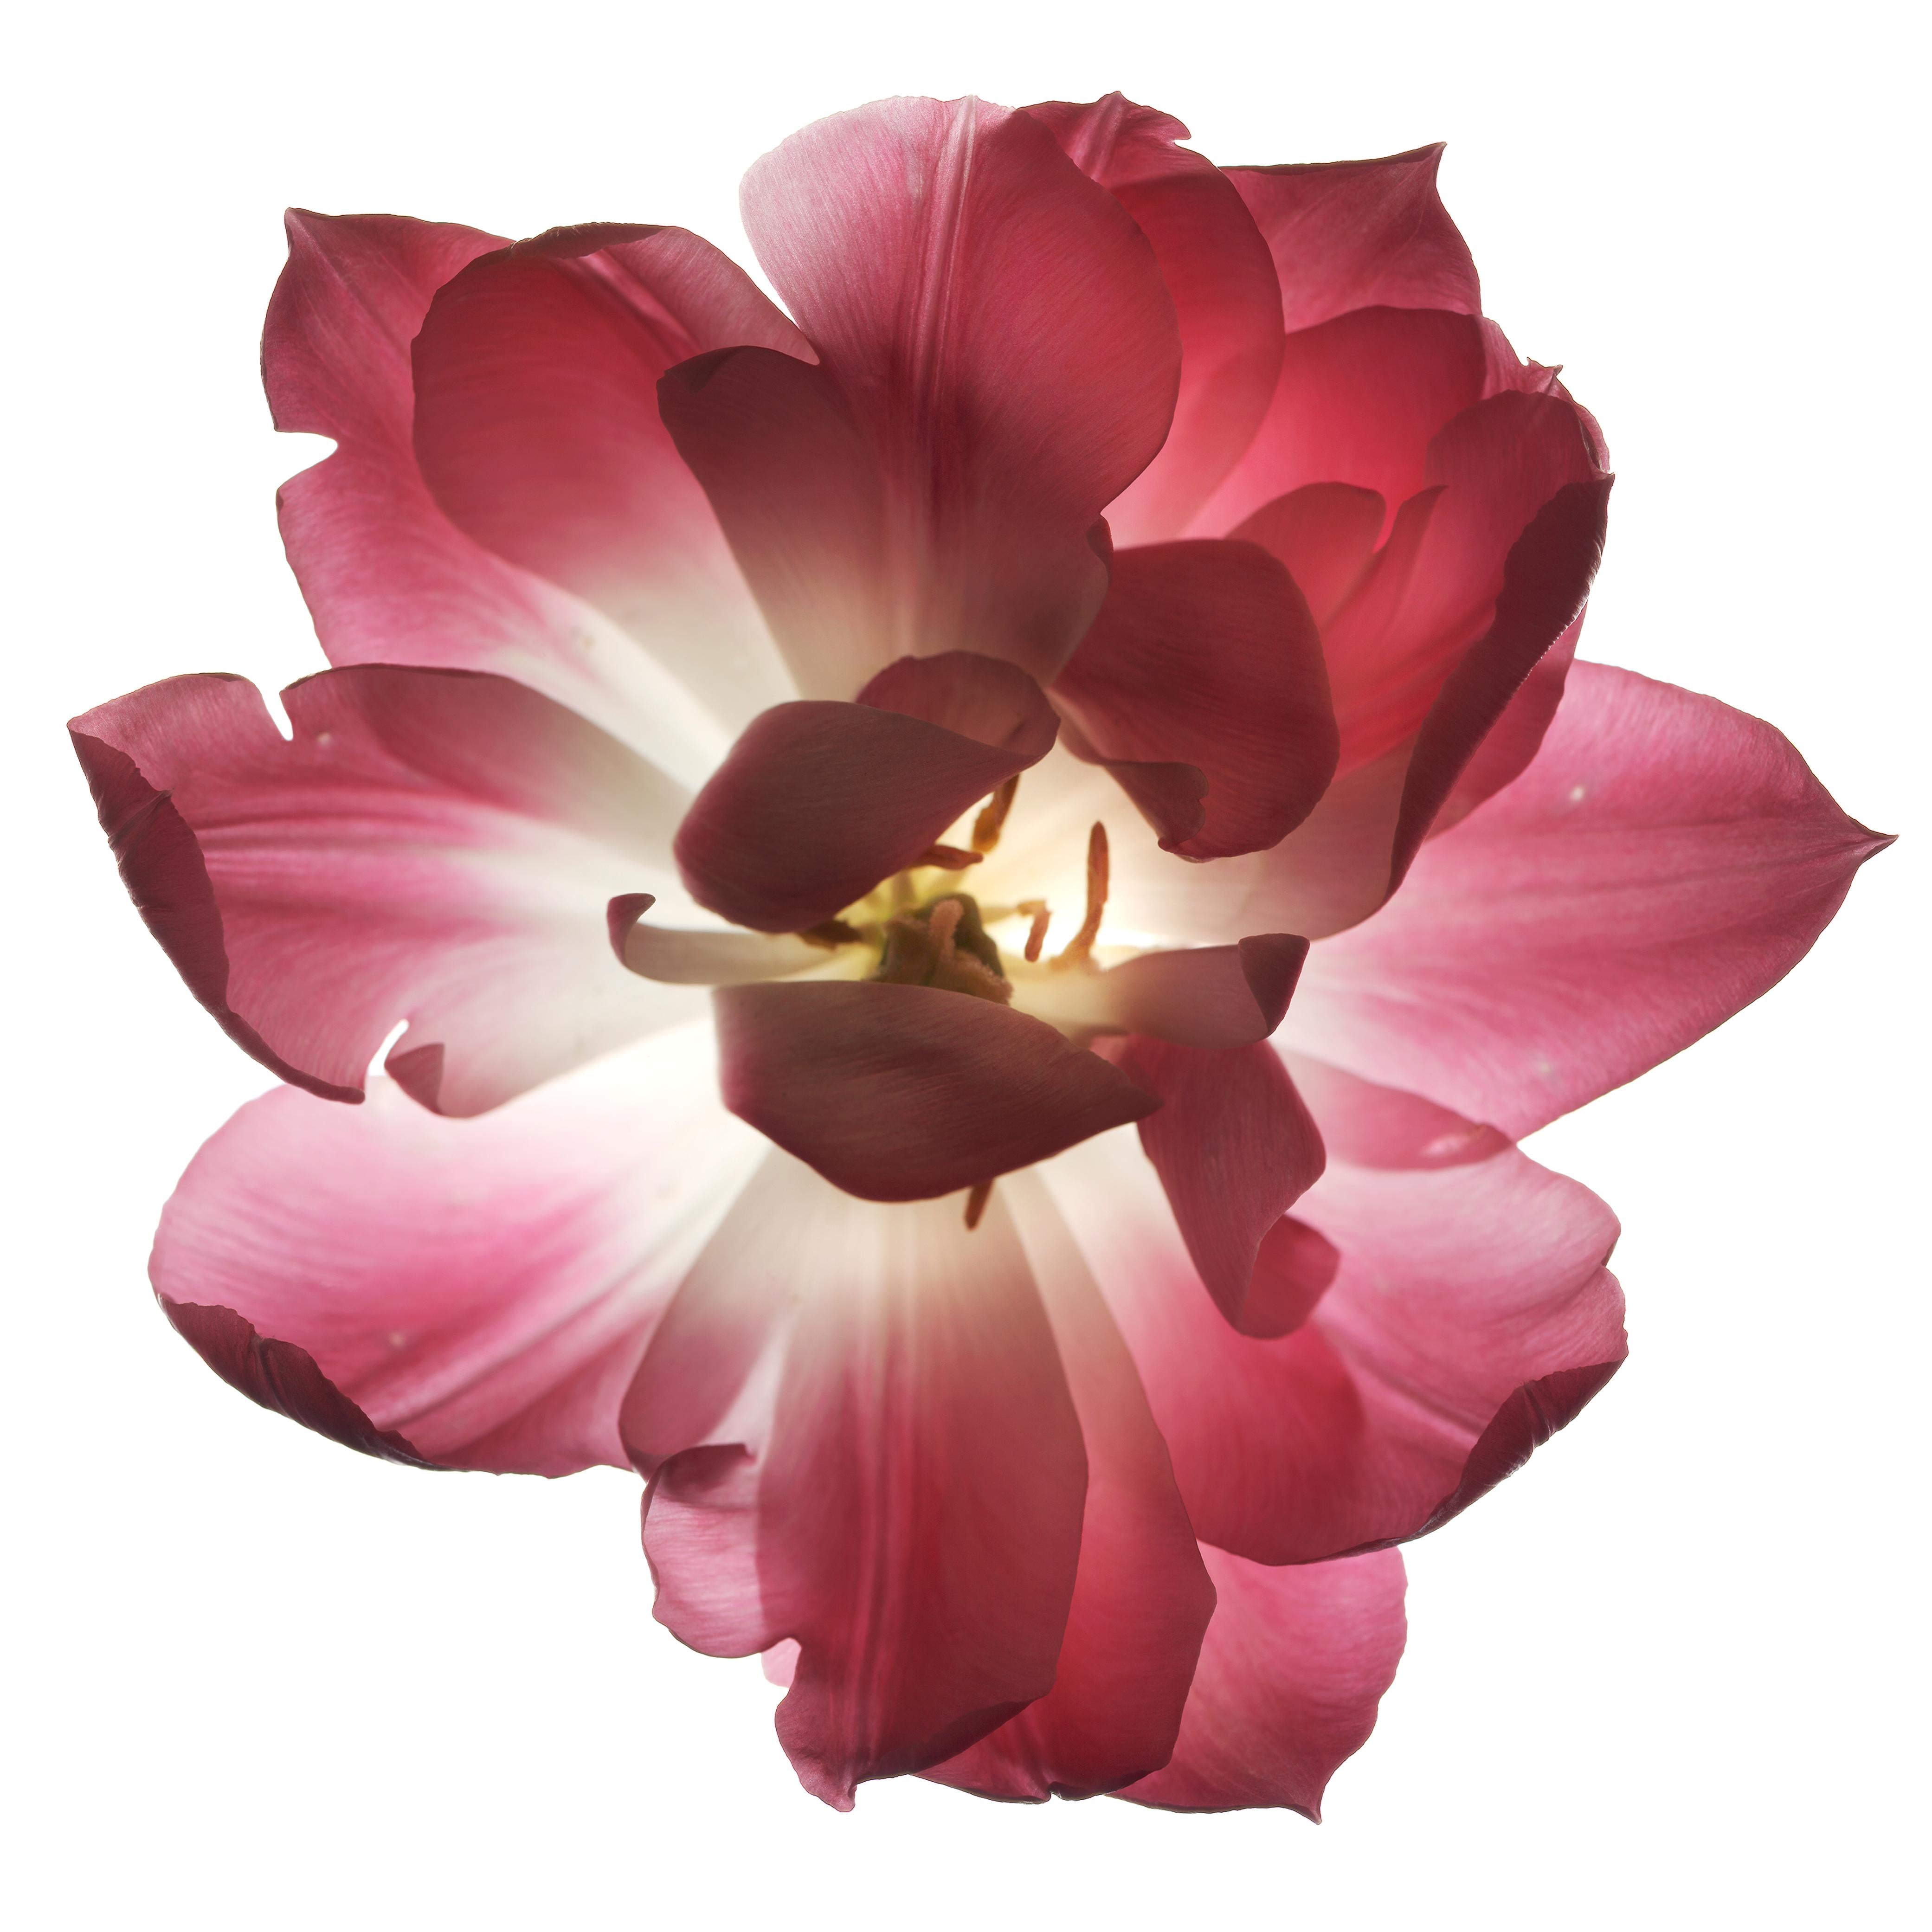 Chad Kleitsch Color Photograph - Untitled Flower # 60 (48" x 48")